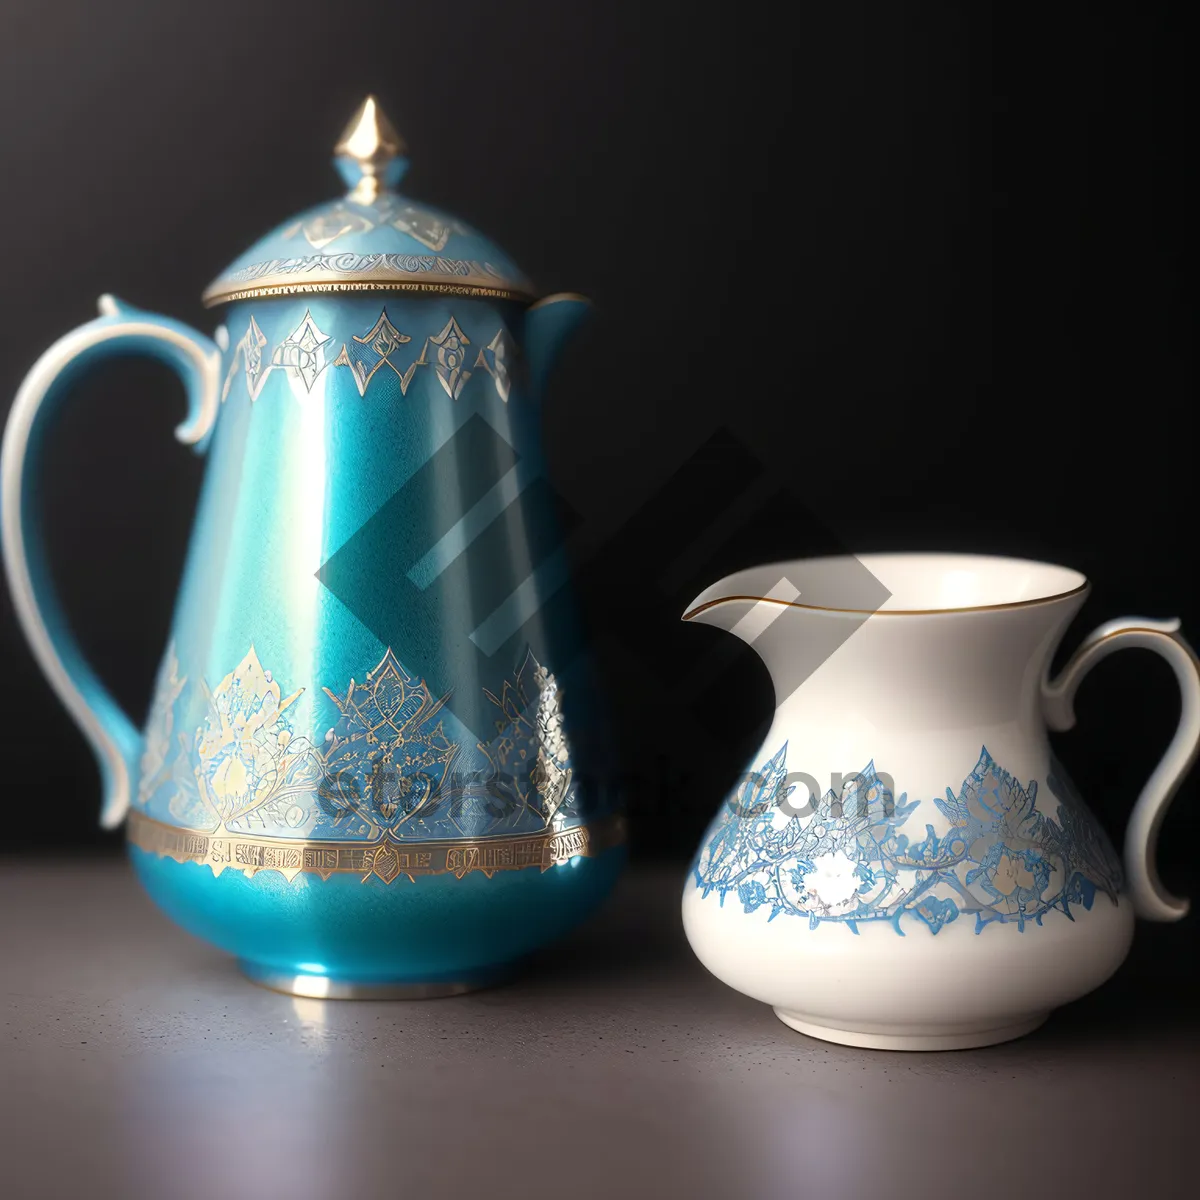 Picture of Coffee Time: Traditional Porcelain Teapot and Cup"
OR
"Morning Beverage: Ceramic Teapot and Coffee Mug